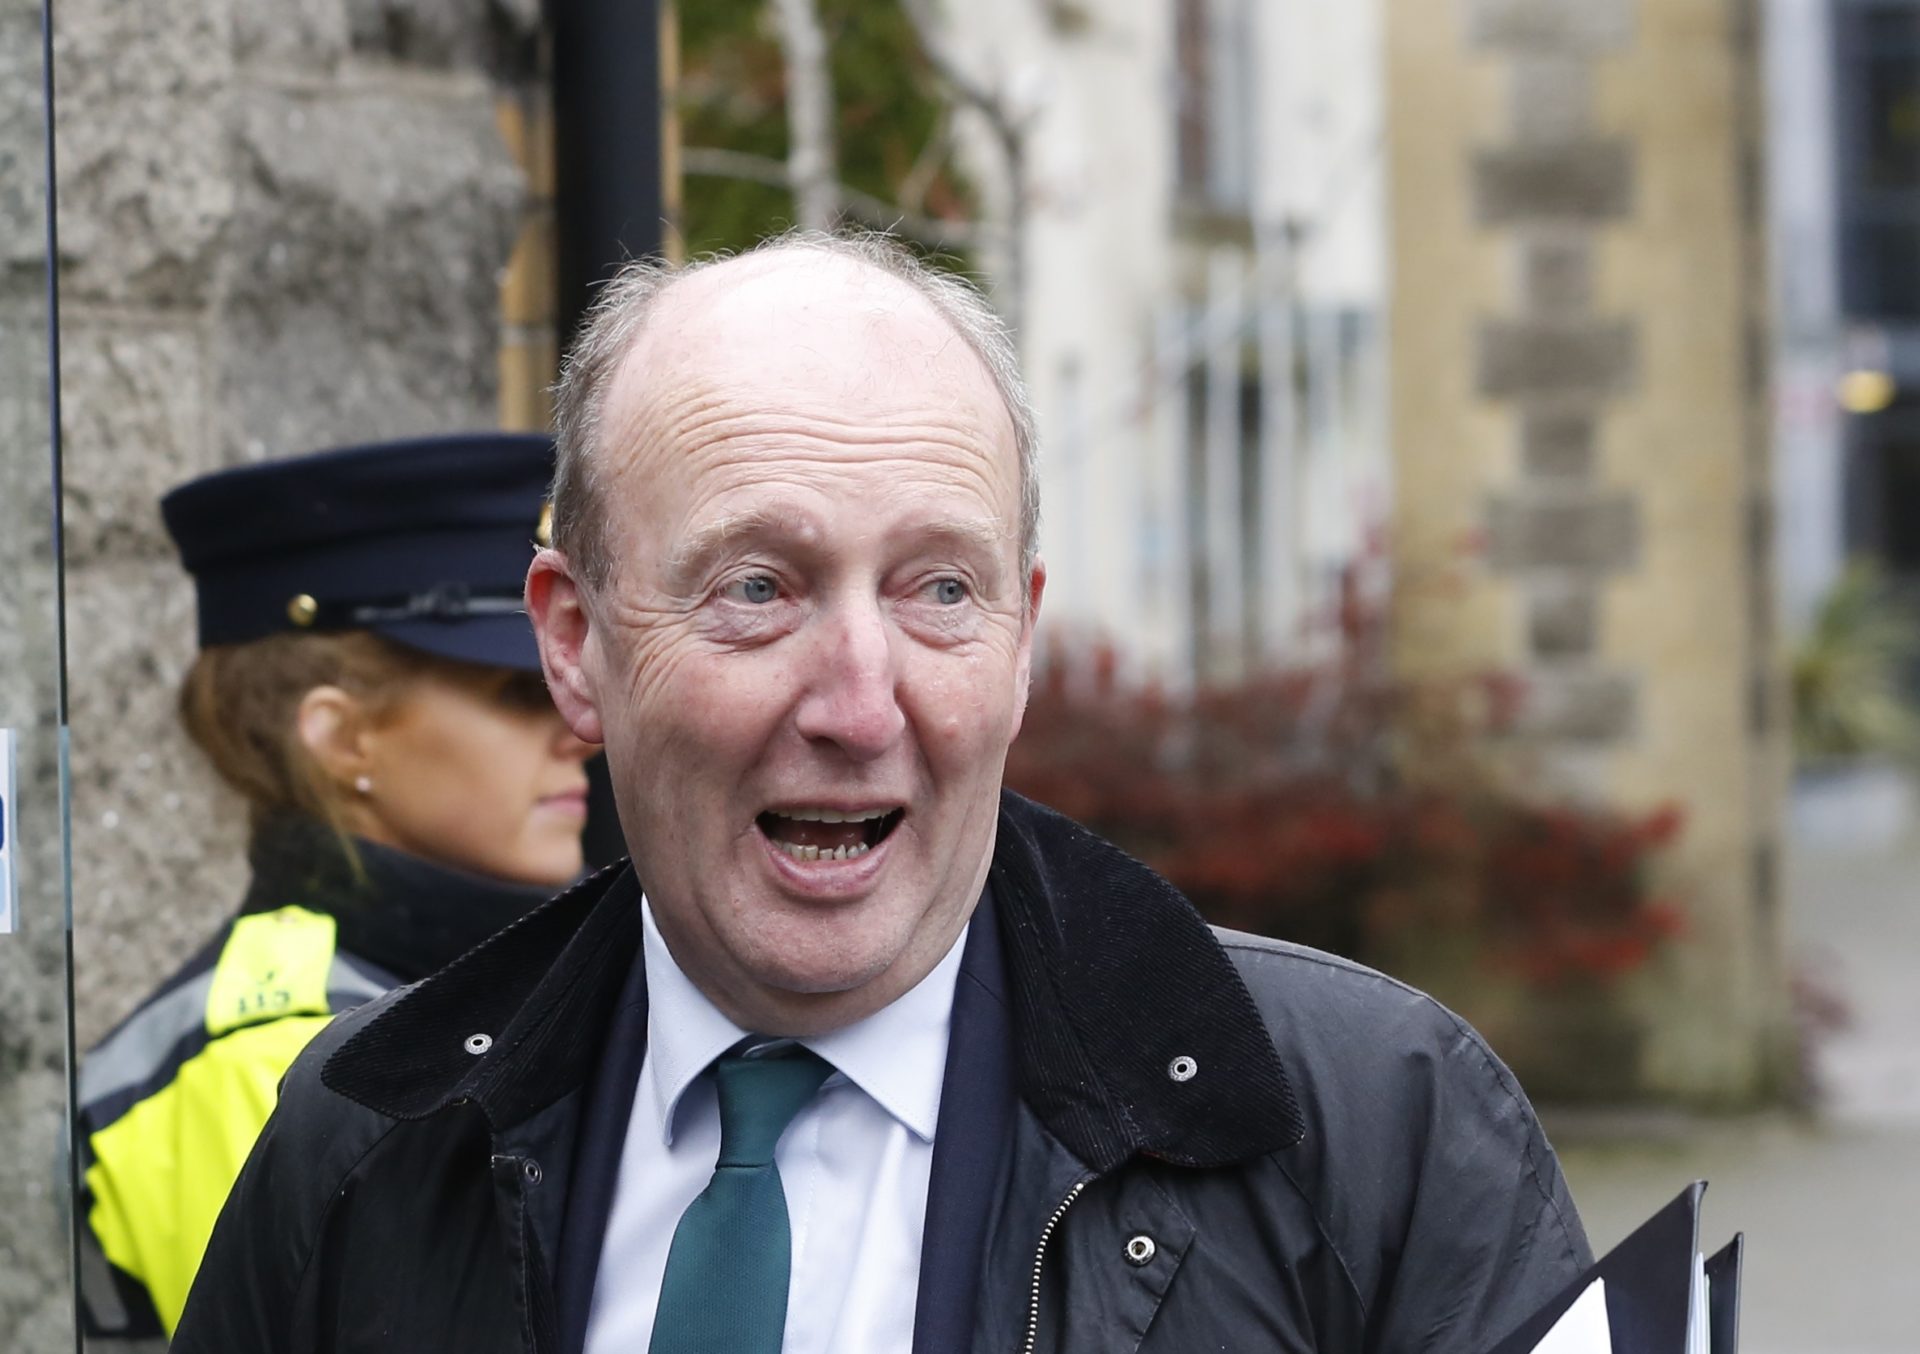 Shane Ross arriving for a Cabinet meeting in Dublin, 9-1-20,